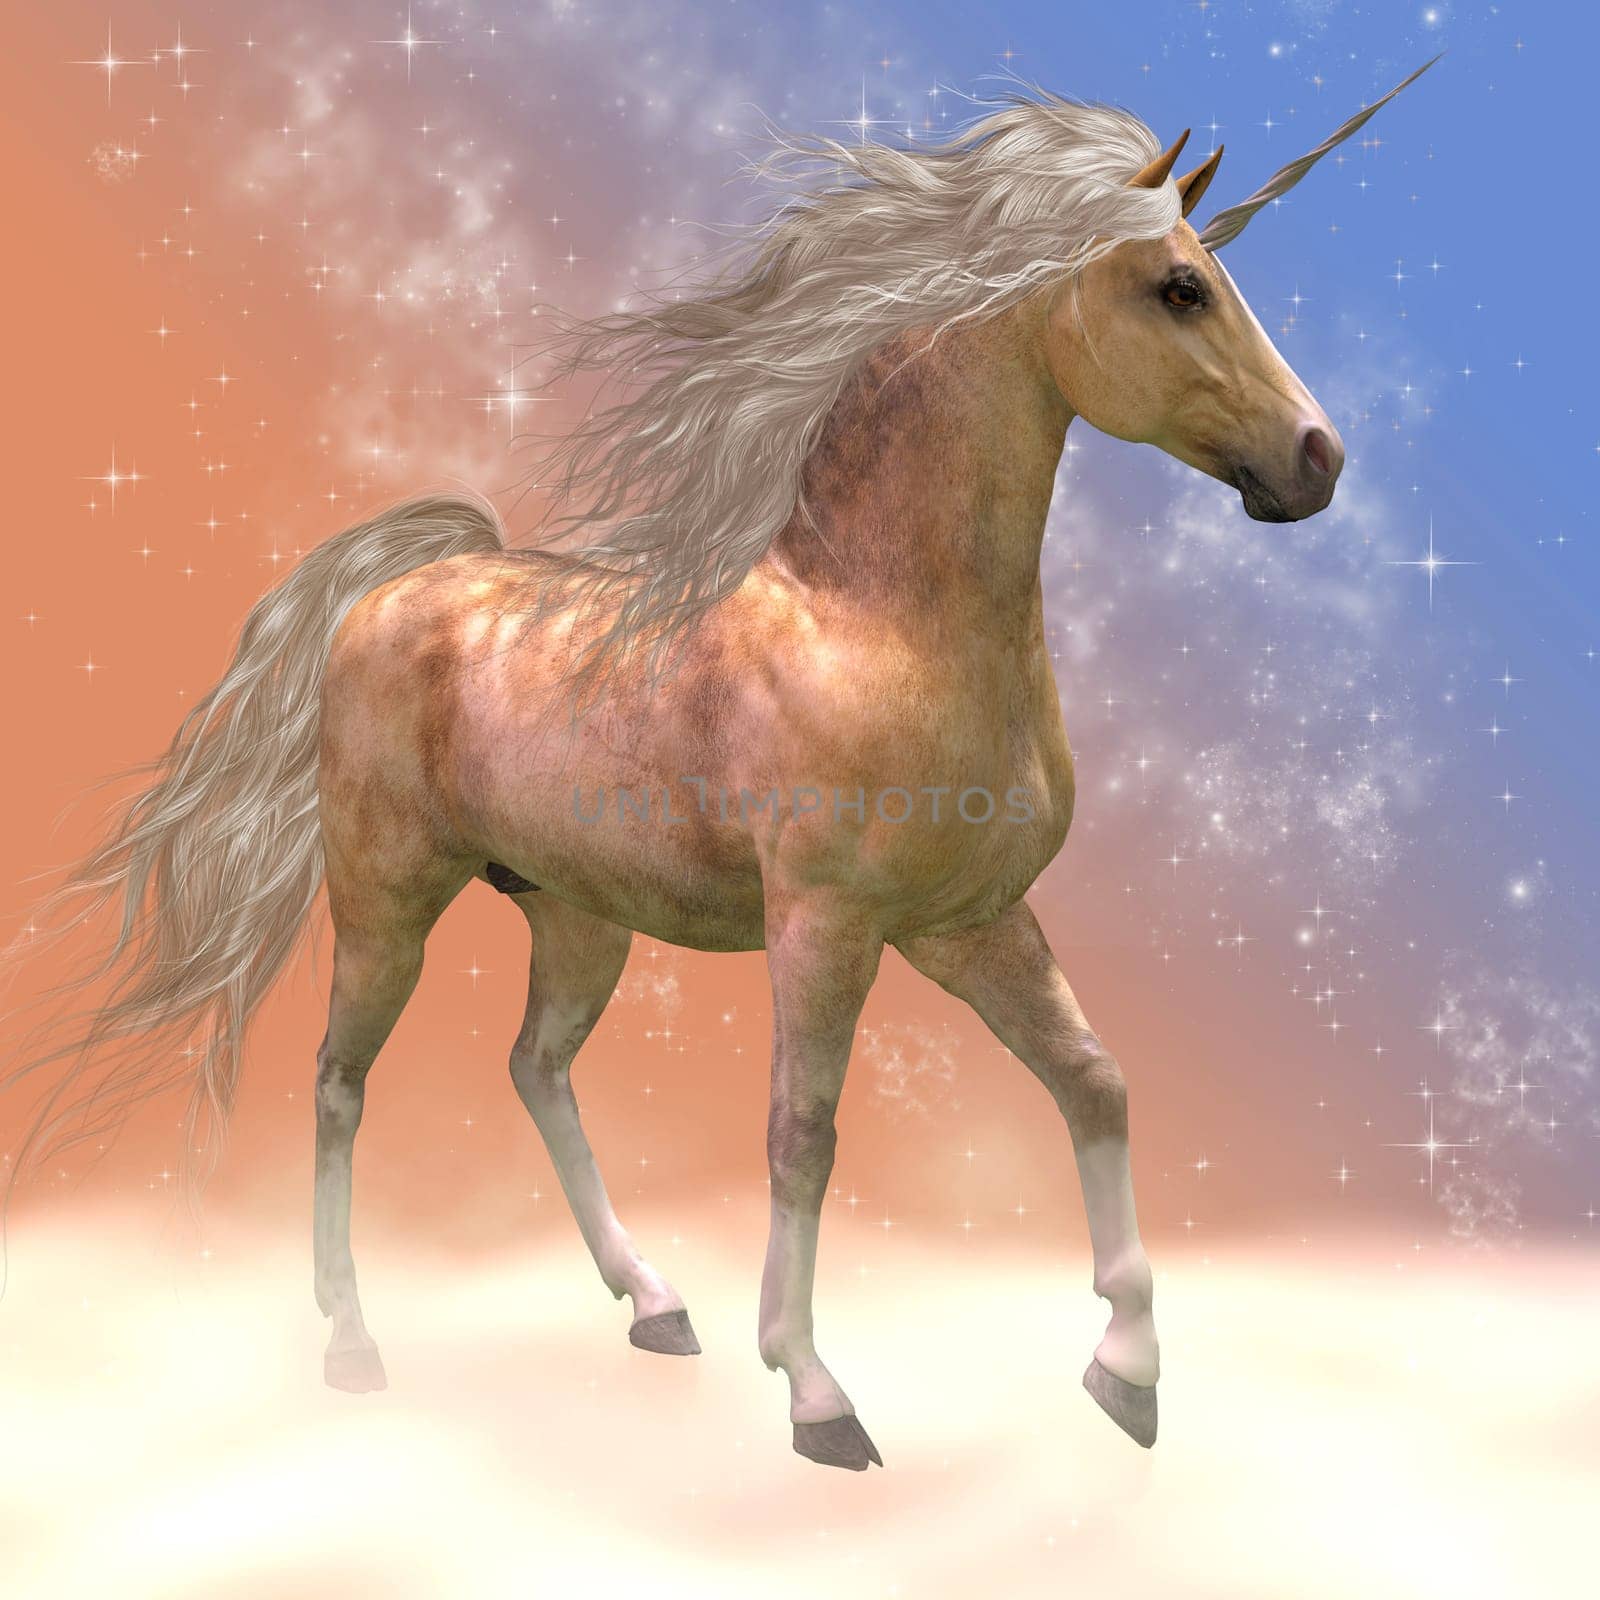 A fantasy image of a Buttermilk male unicorn and misty fog in a dazzling display of stars and light.